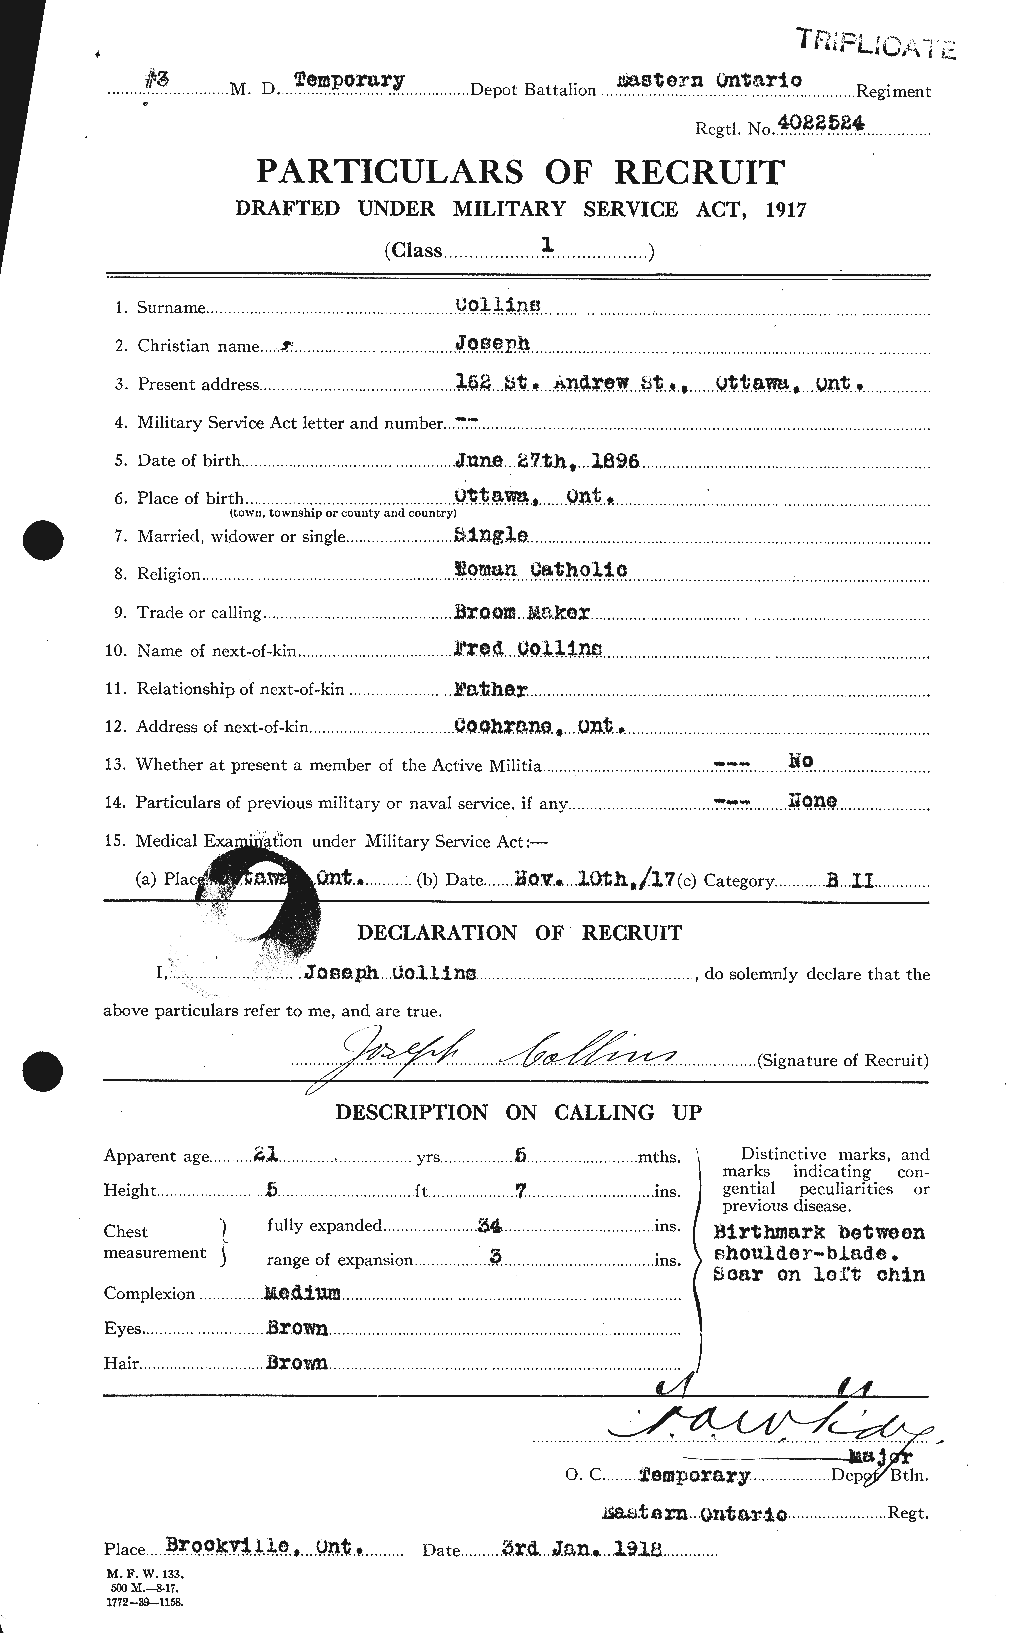 Personnel Records of the First World War - CEF 069518a